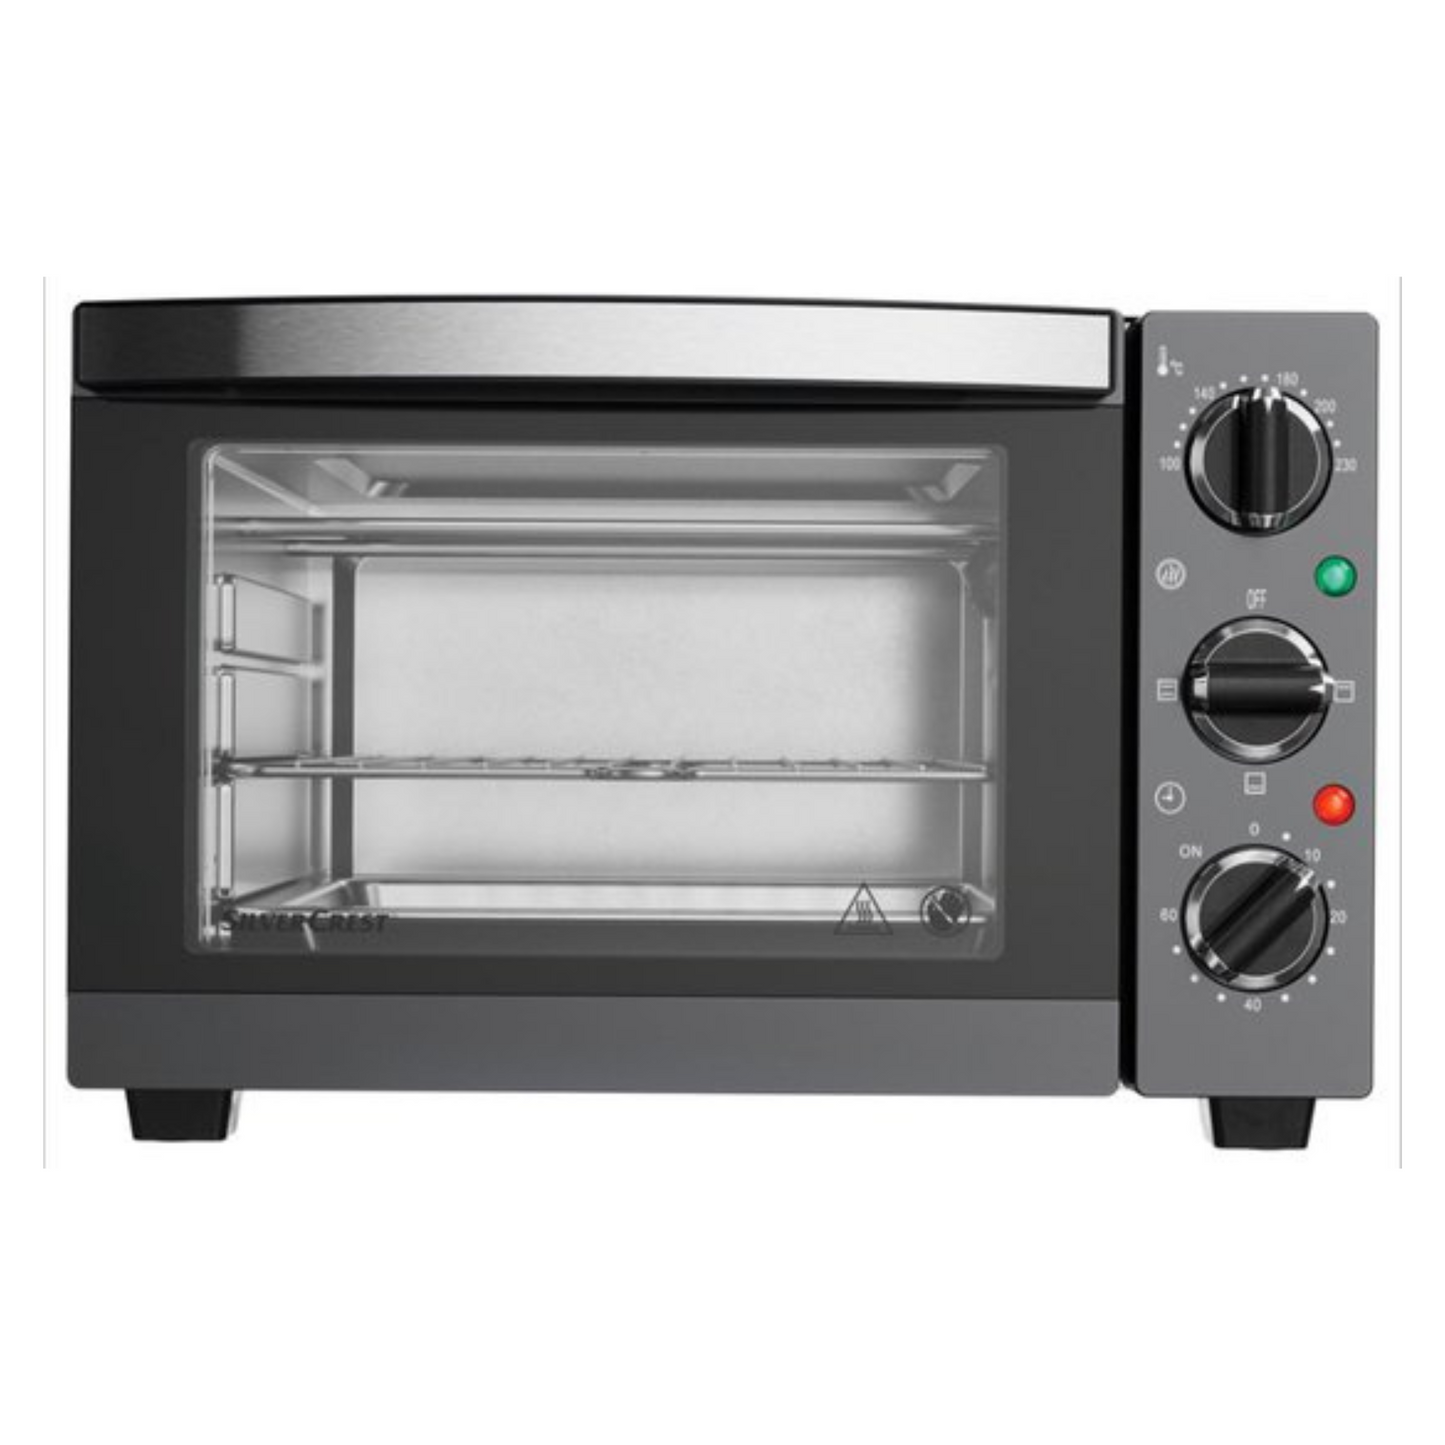 Silver Crest Grill Oven 15L